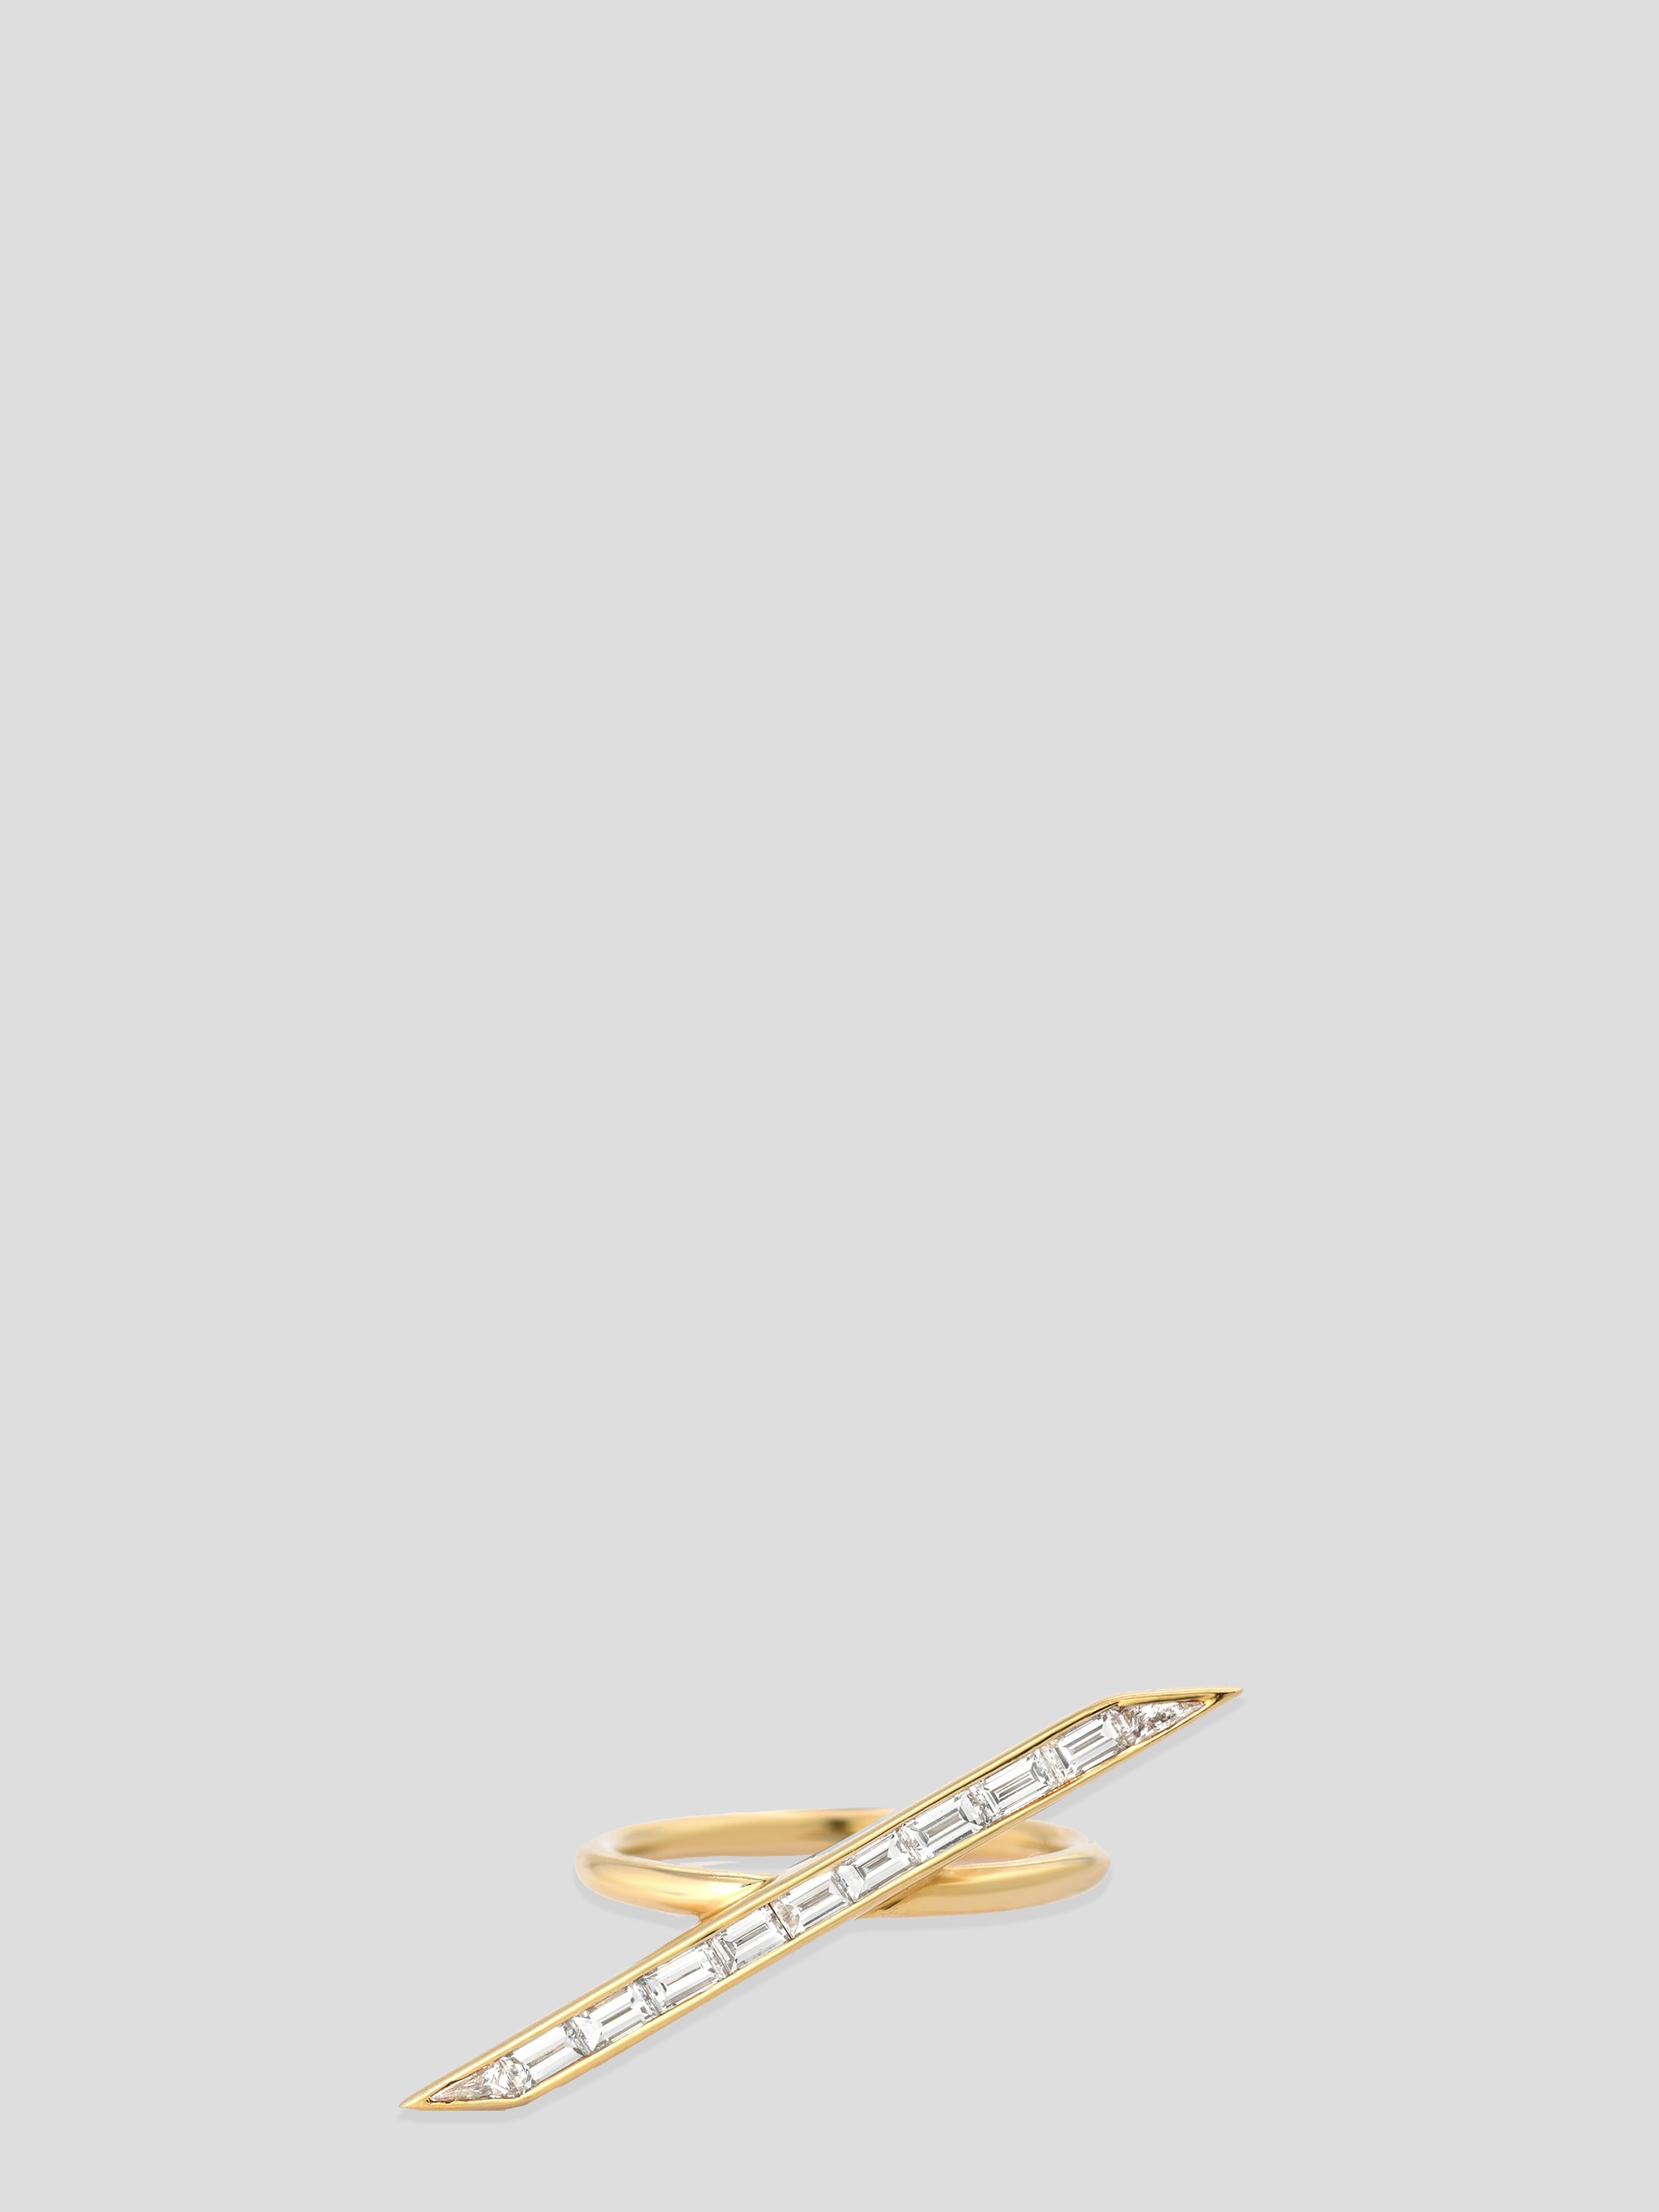 Image of 18k Yellow Gold and Diamond Line Ring